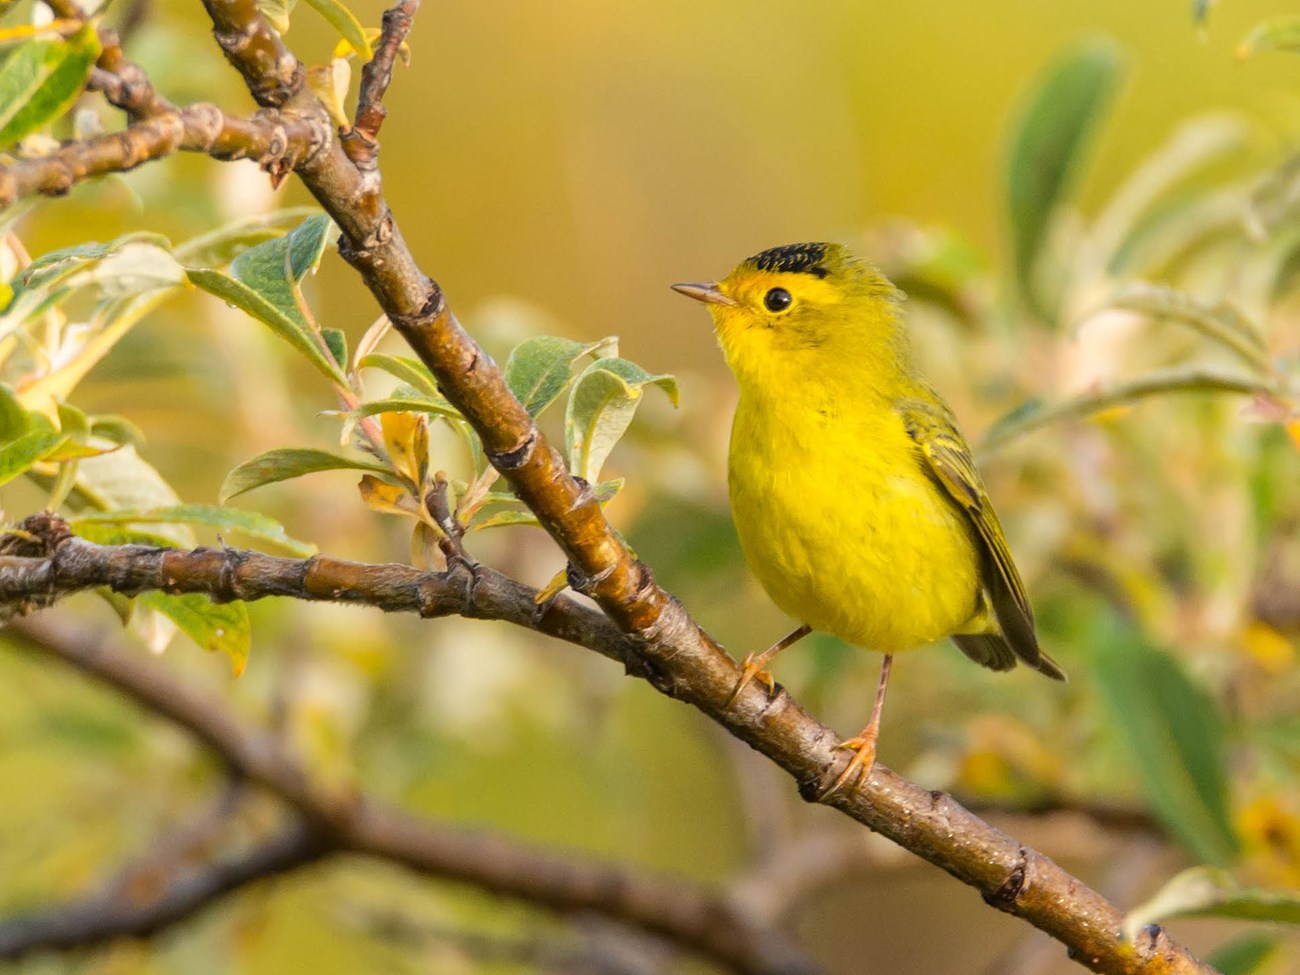 Yellow bird with a black cap perched on a branch